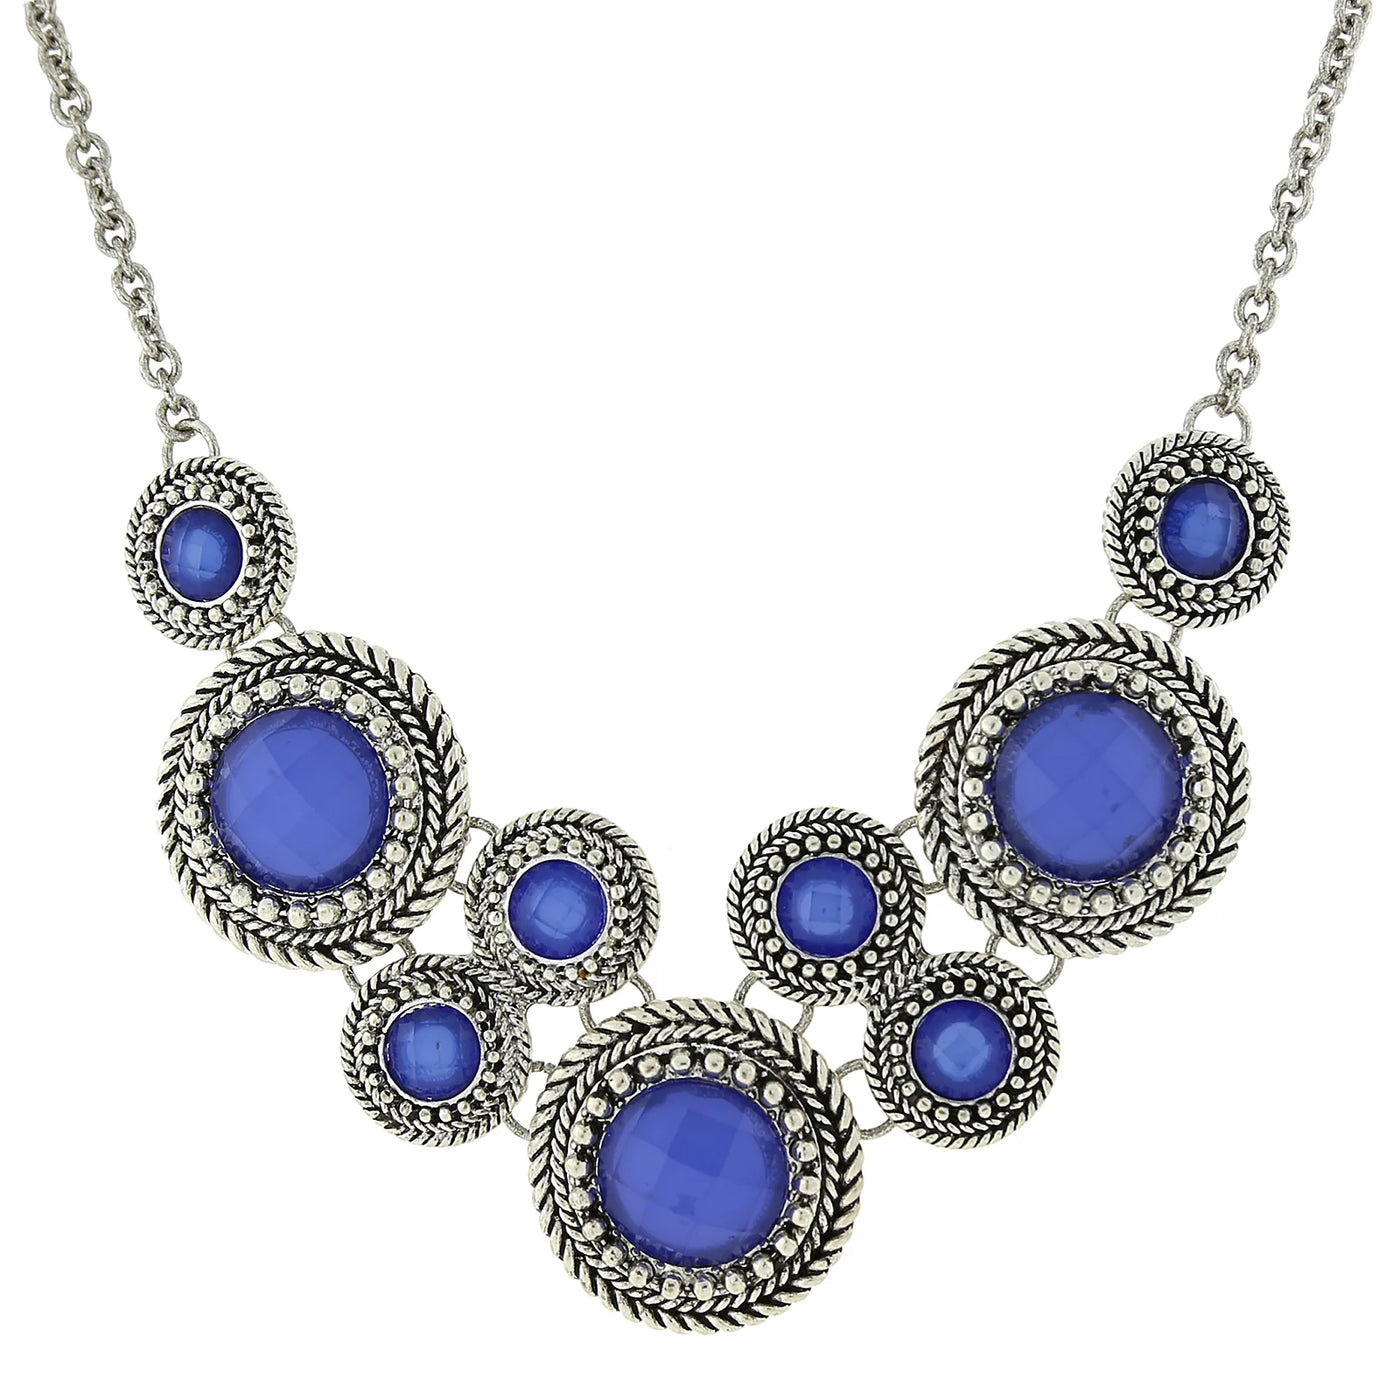 Round Faceted Bib Necklace